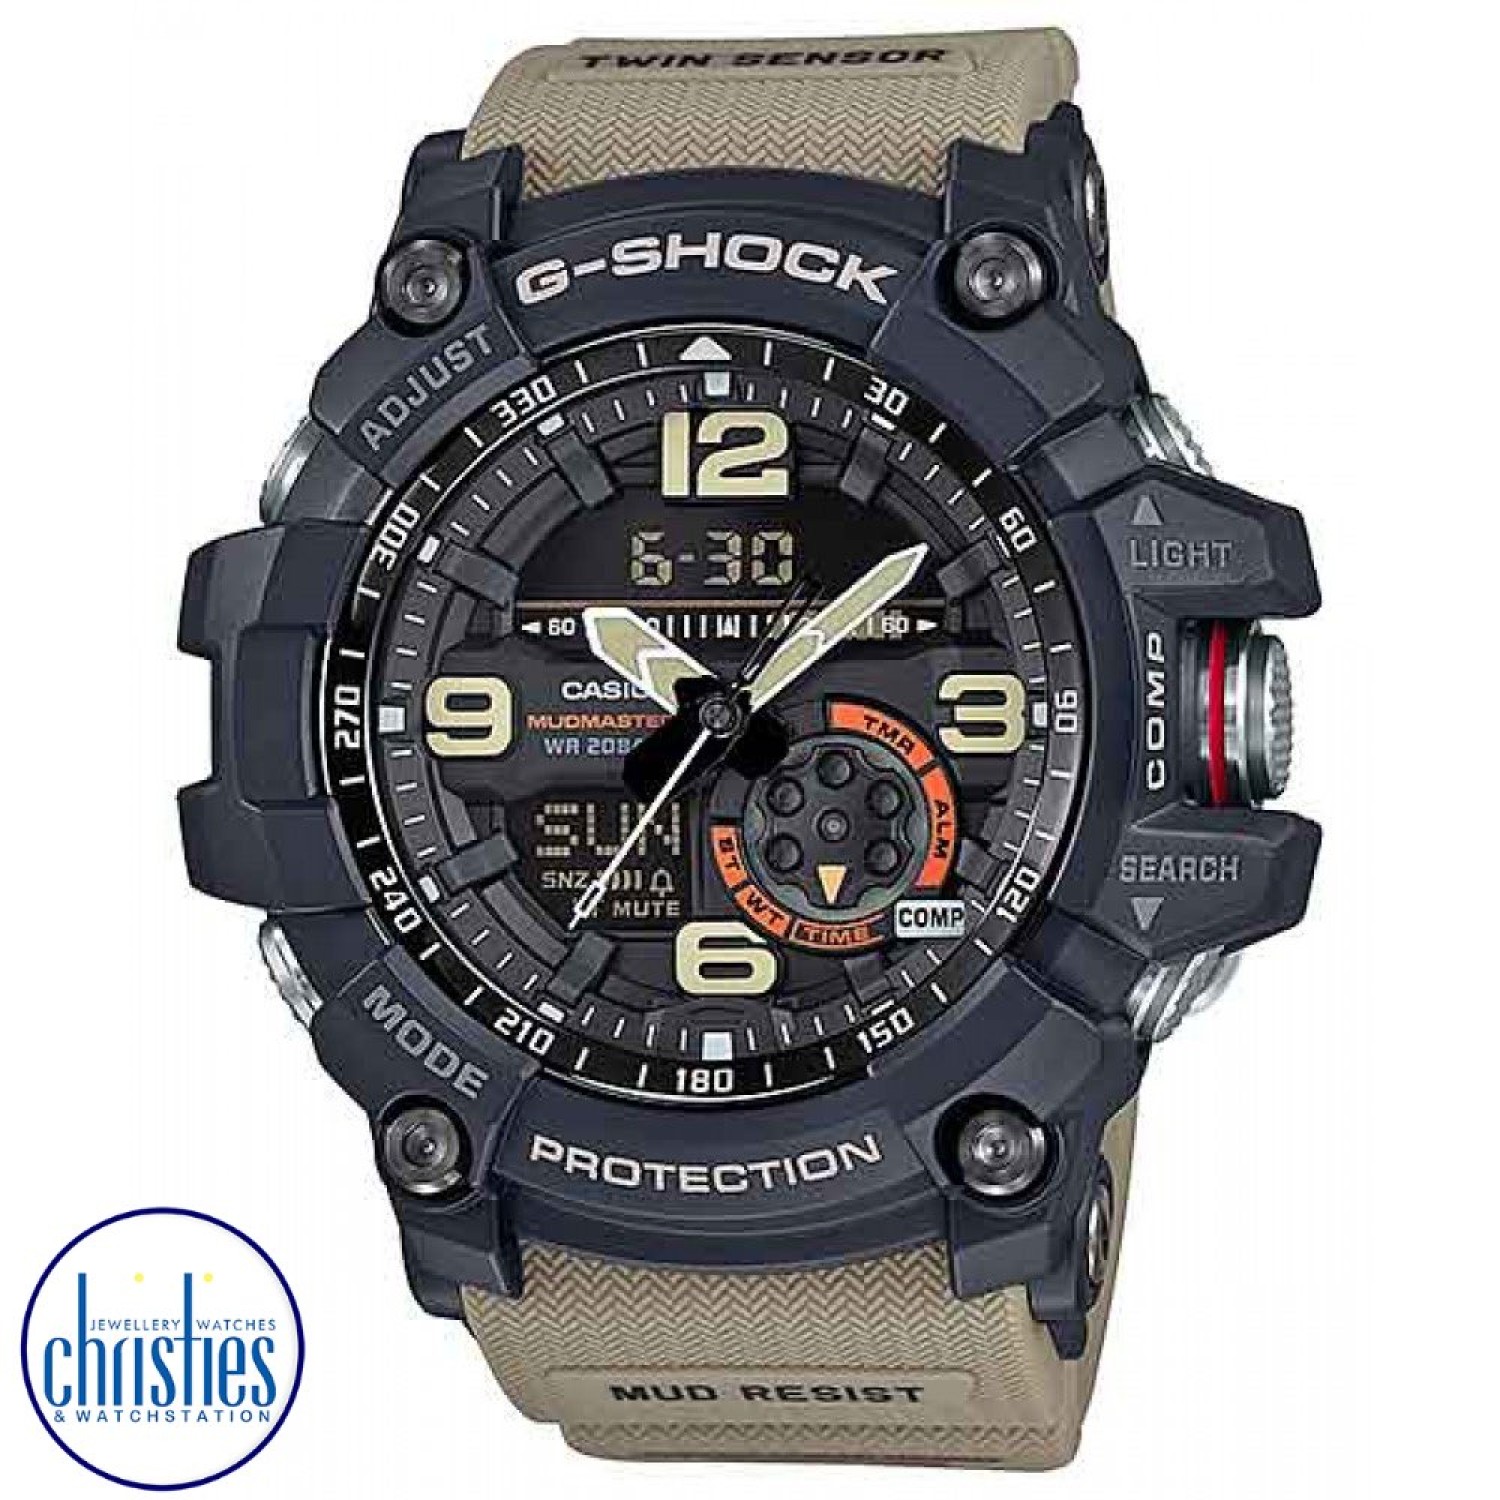 GG1000-1A5 G-Shock MUDMASTER Twin Sensor. This is the latest new addition to the MASTER OF G MUDMASTER Series, now available instore and online at Christies, was created especially for this whose work takes it into areas where piles of rubble, dirt, and d